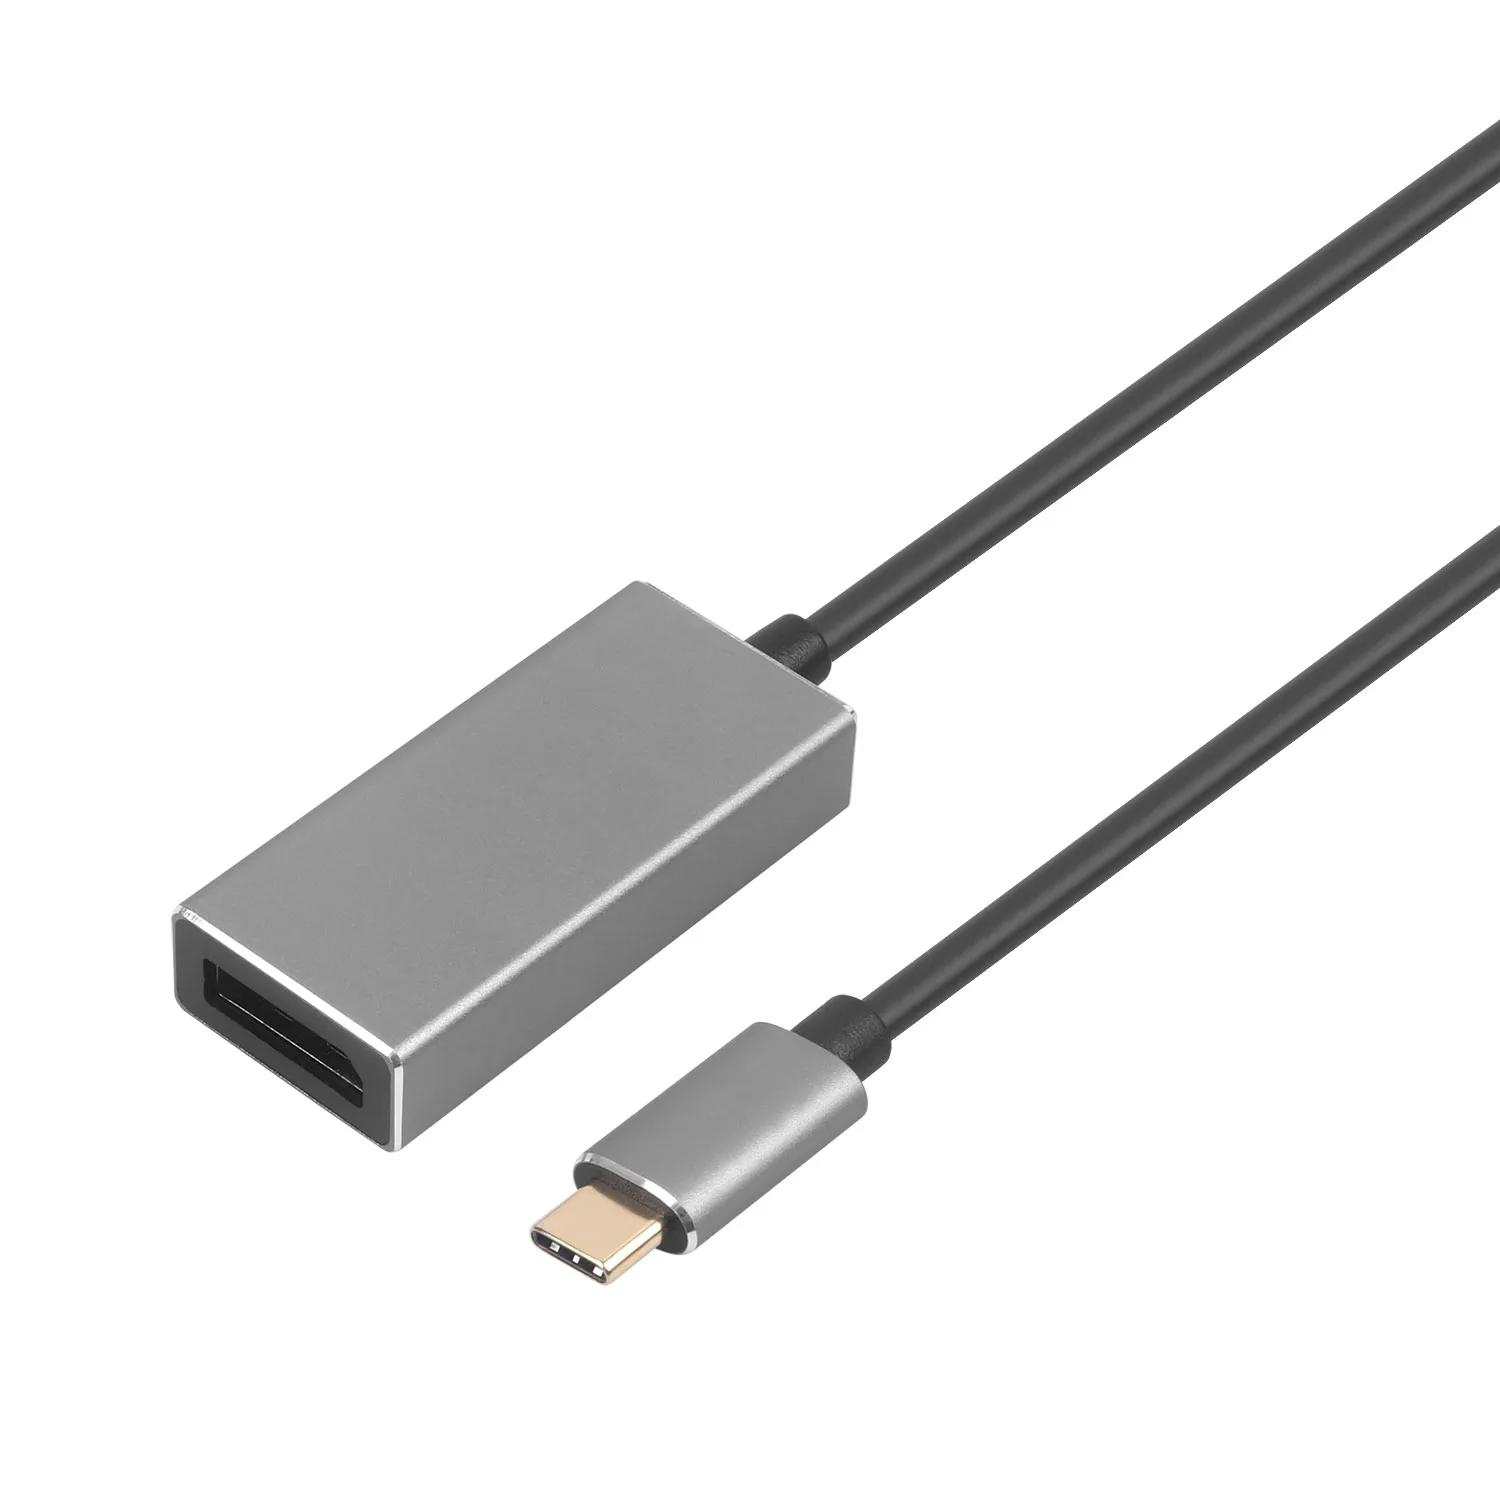 UNIEAN High Quality Braid Shielding Aluminum USB3.1 USB Type C to DP Cable for Camera HDTV Monitor Projector